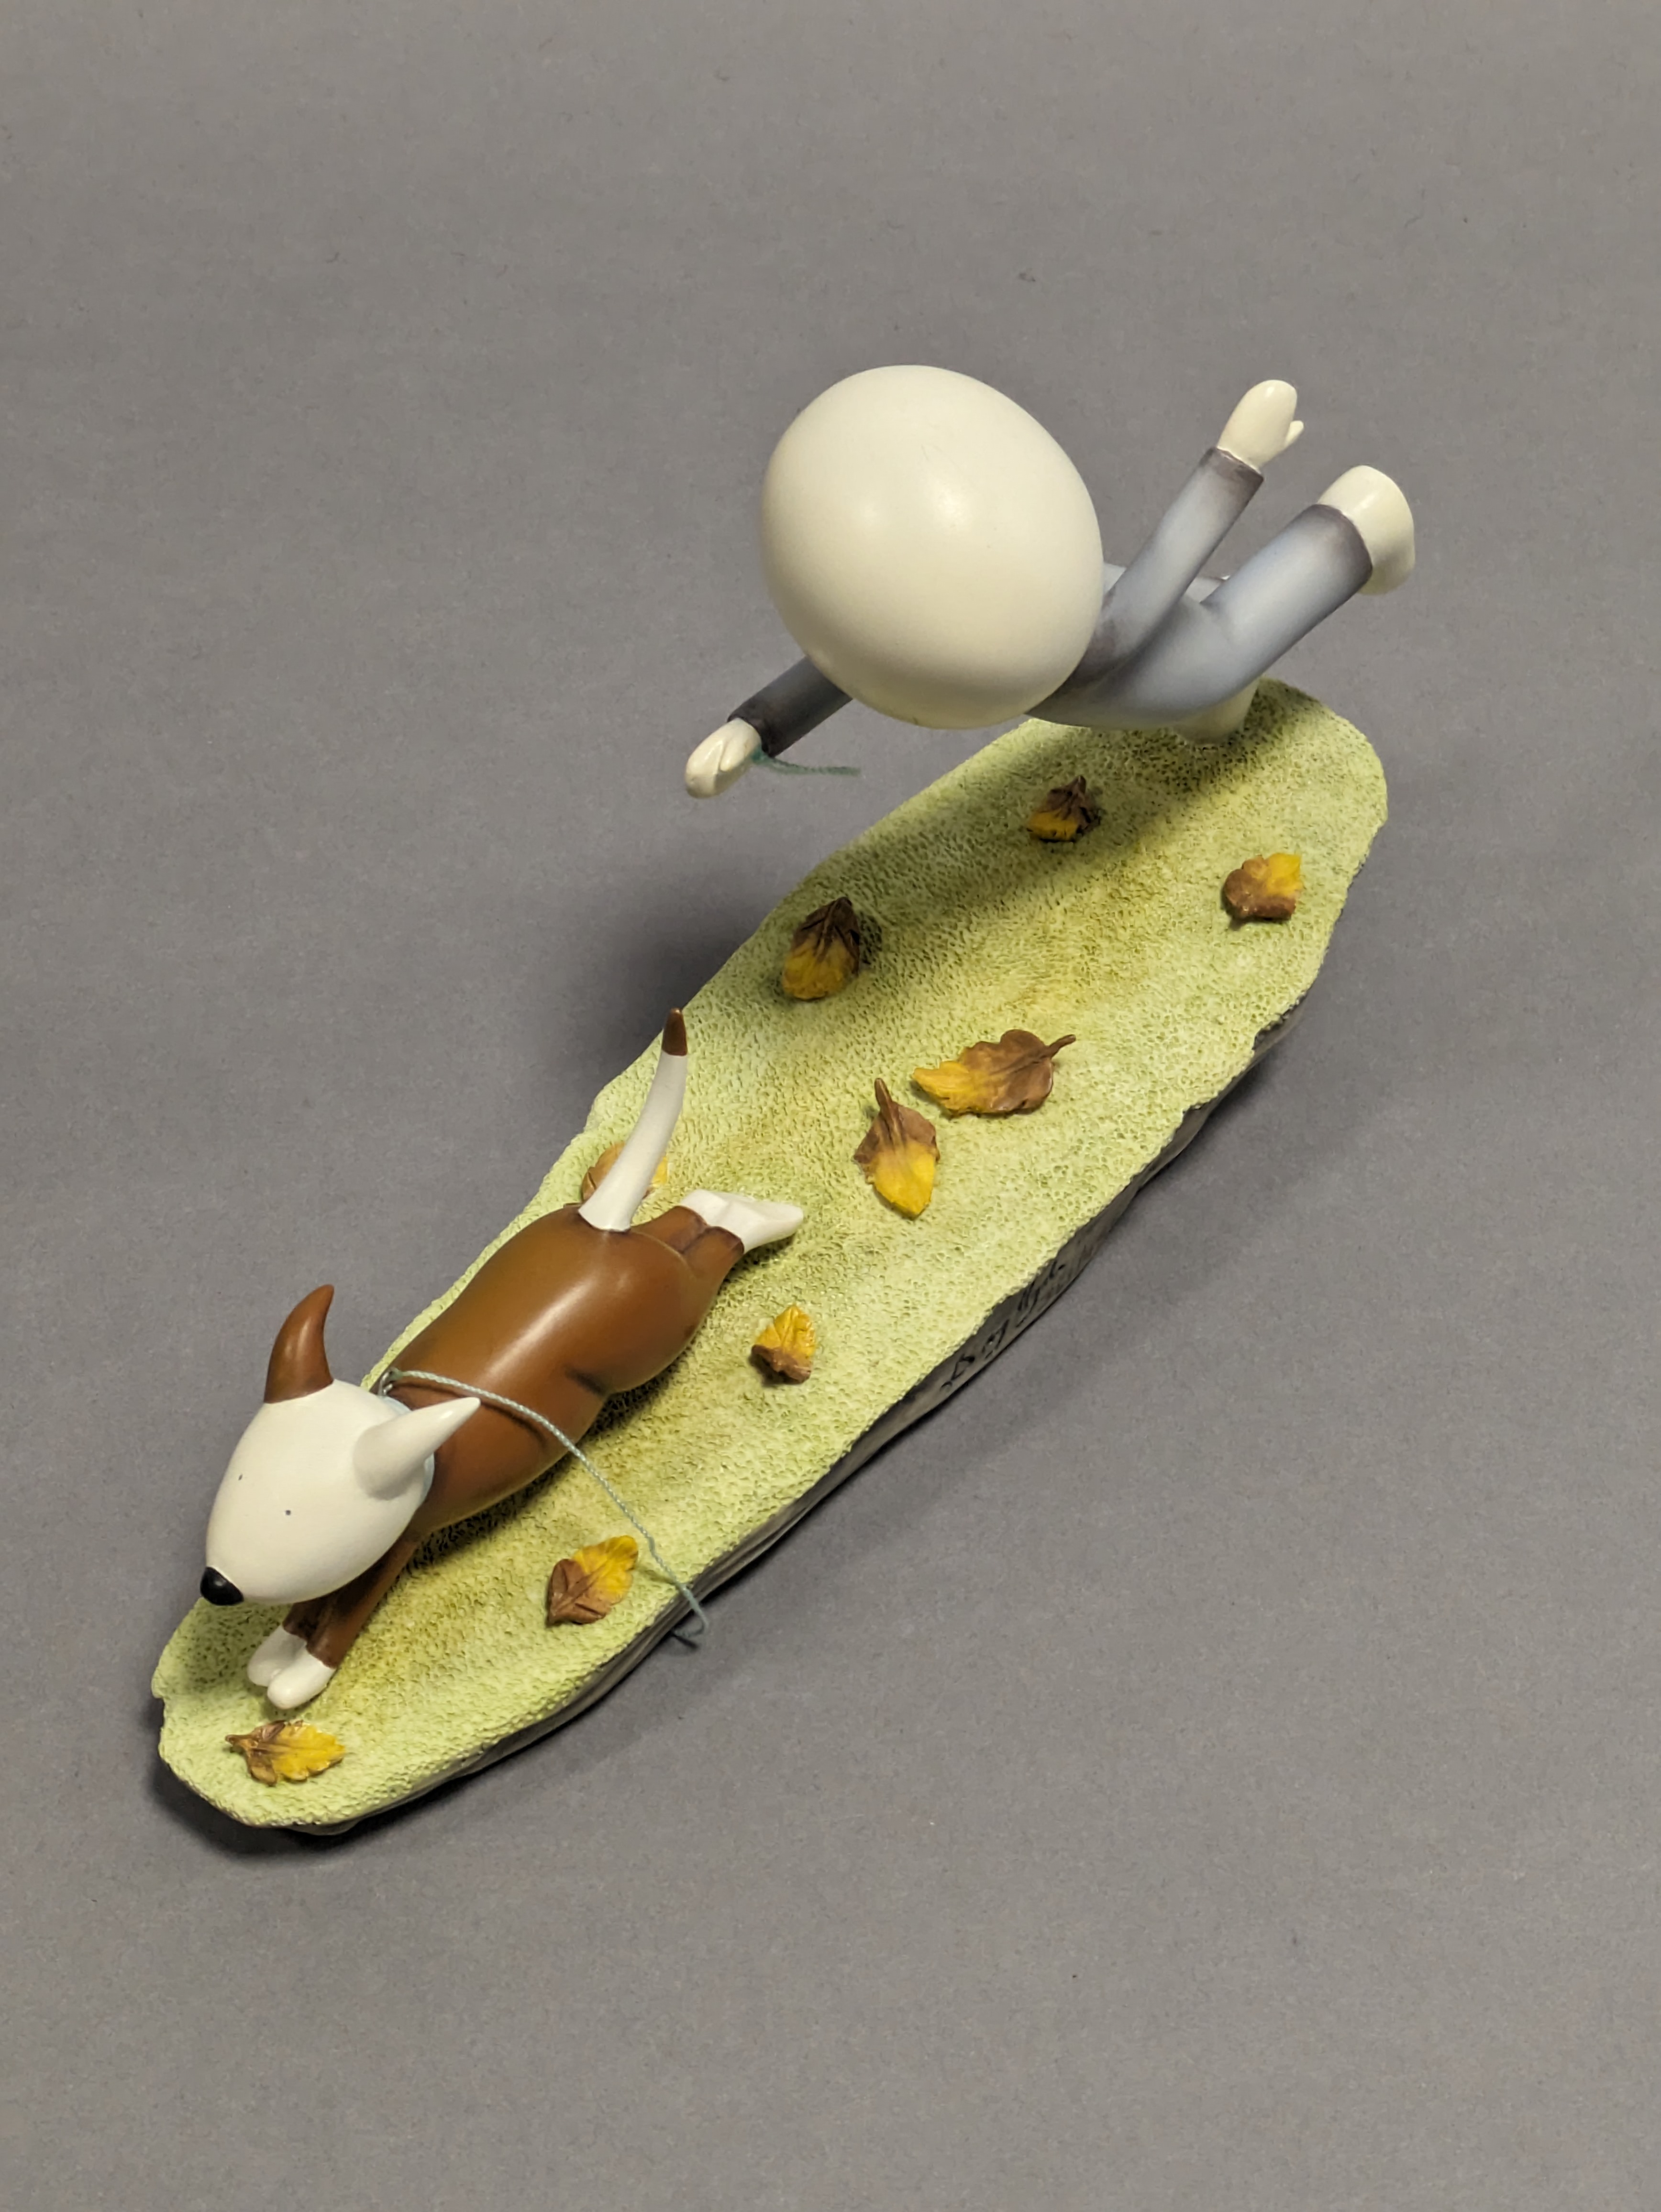 A Doug Hyde limited edition sculpture “Catch Me If You Can”, signed & numbered 361/495, 25cm long x - Image 5 of 5